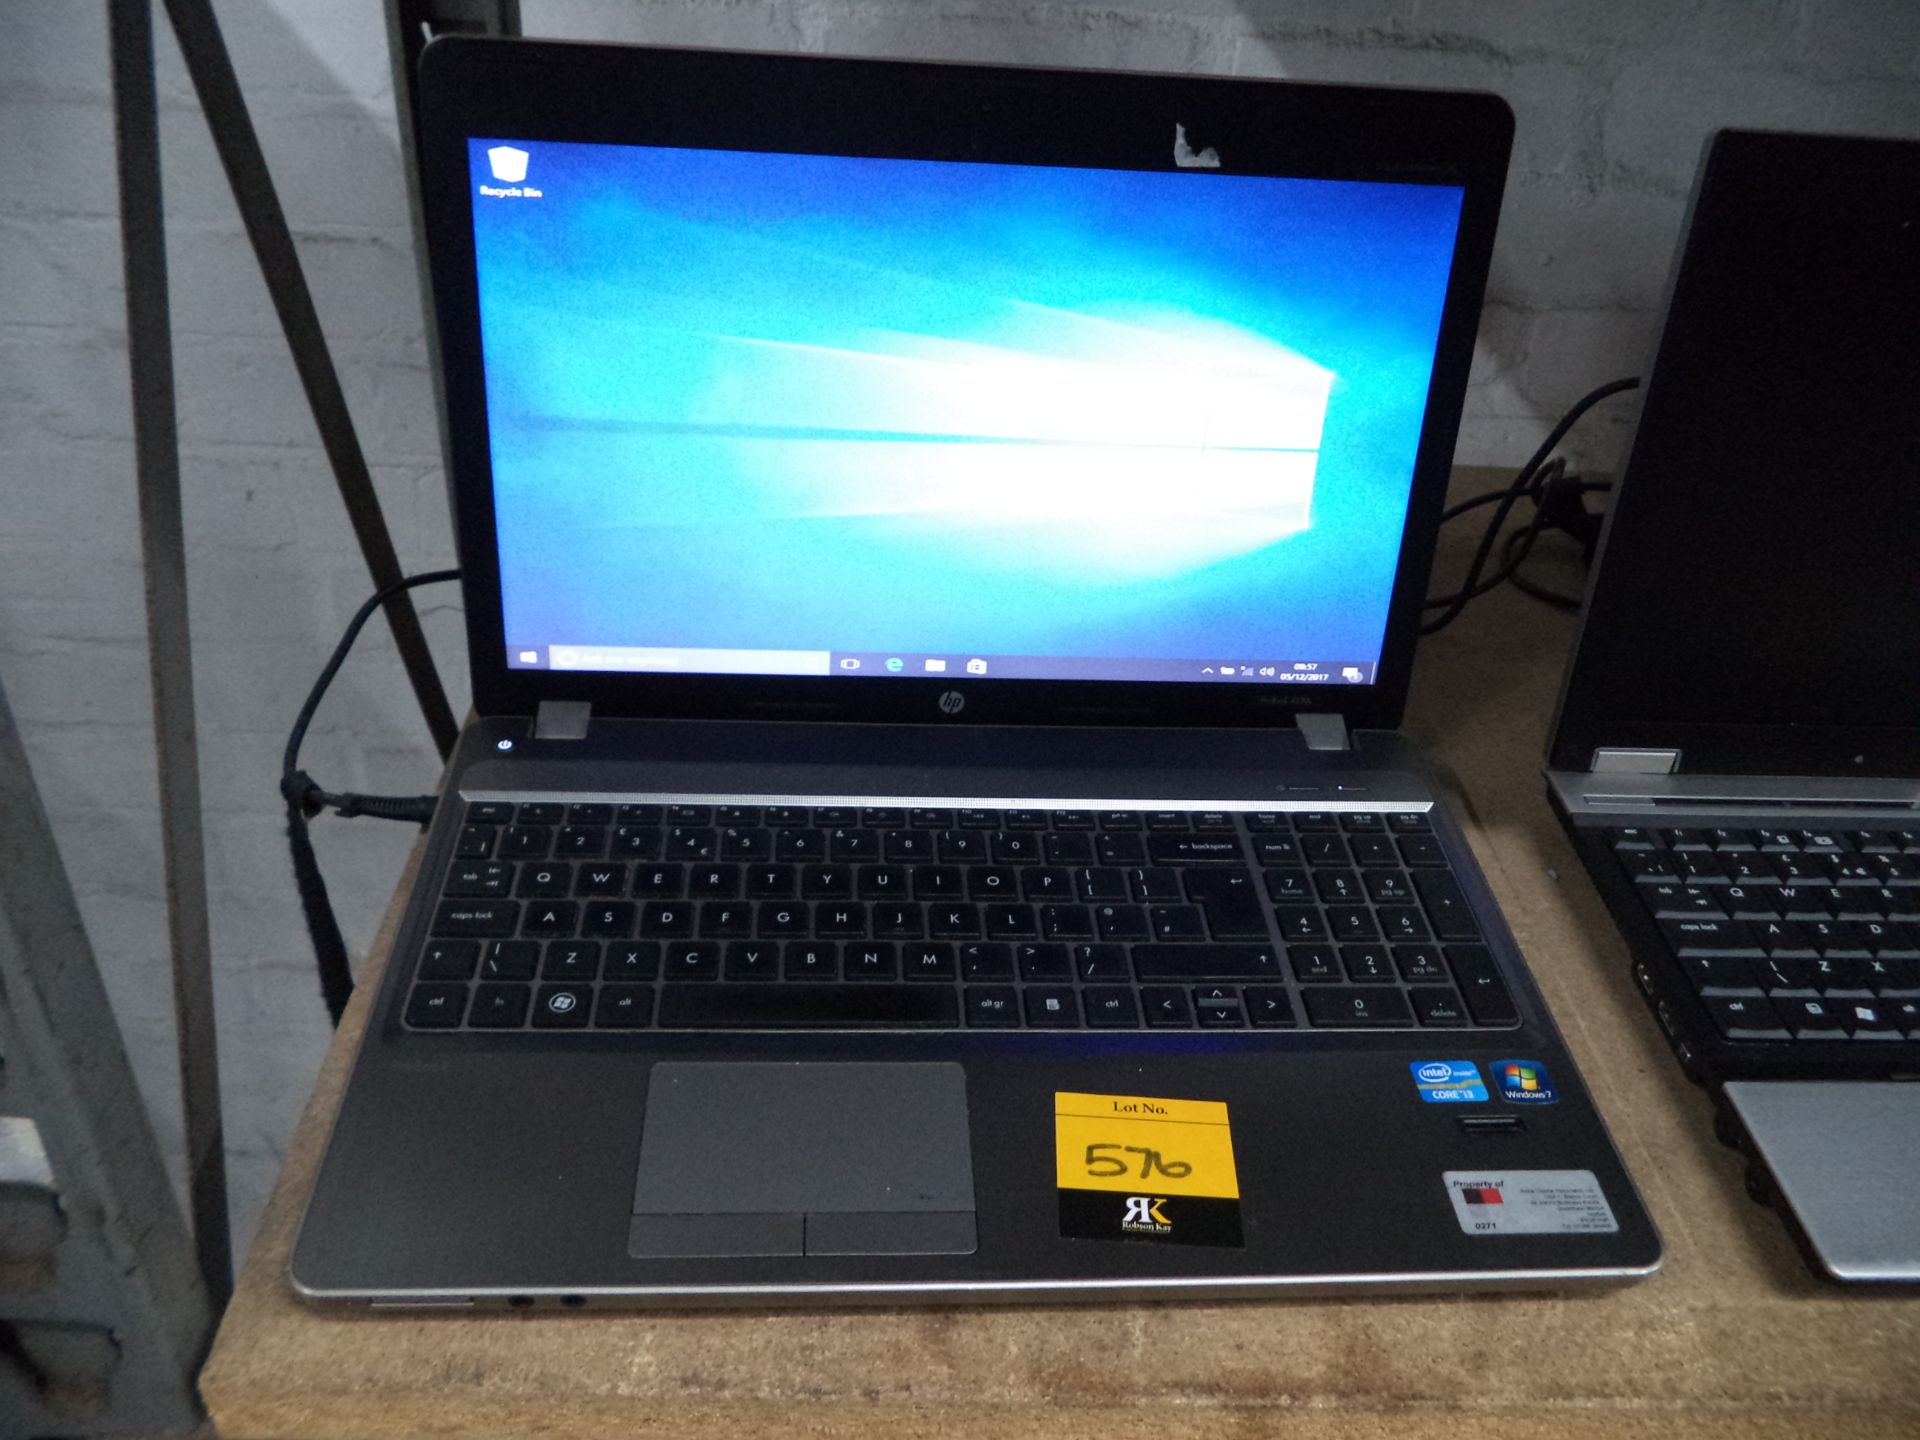 HP ProBook 4530S notebook computer with Intel Core i3-2350M @ 2.3Ghz, 4GB Ram, 320GB HDD